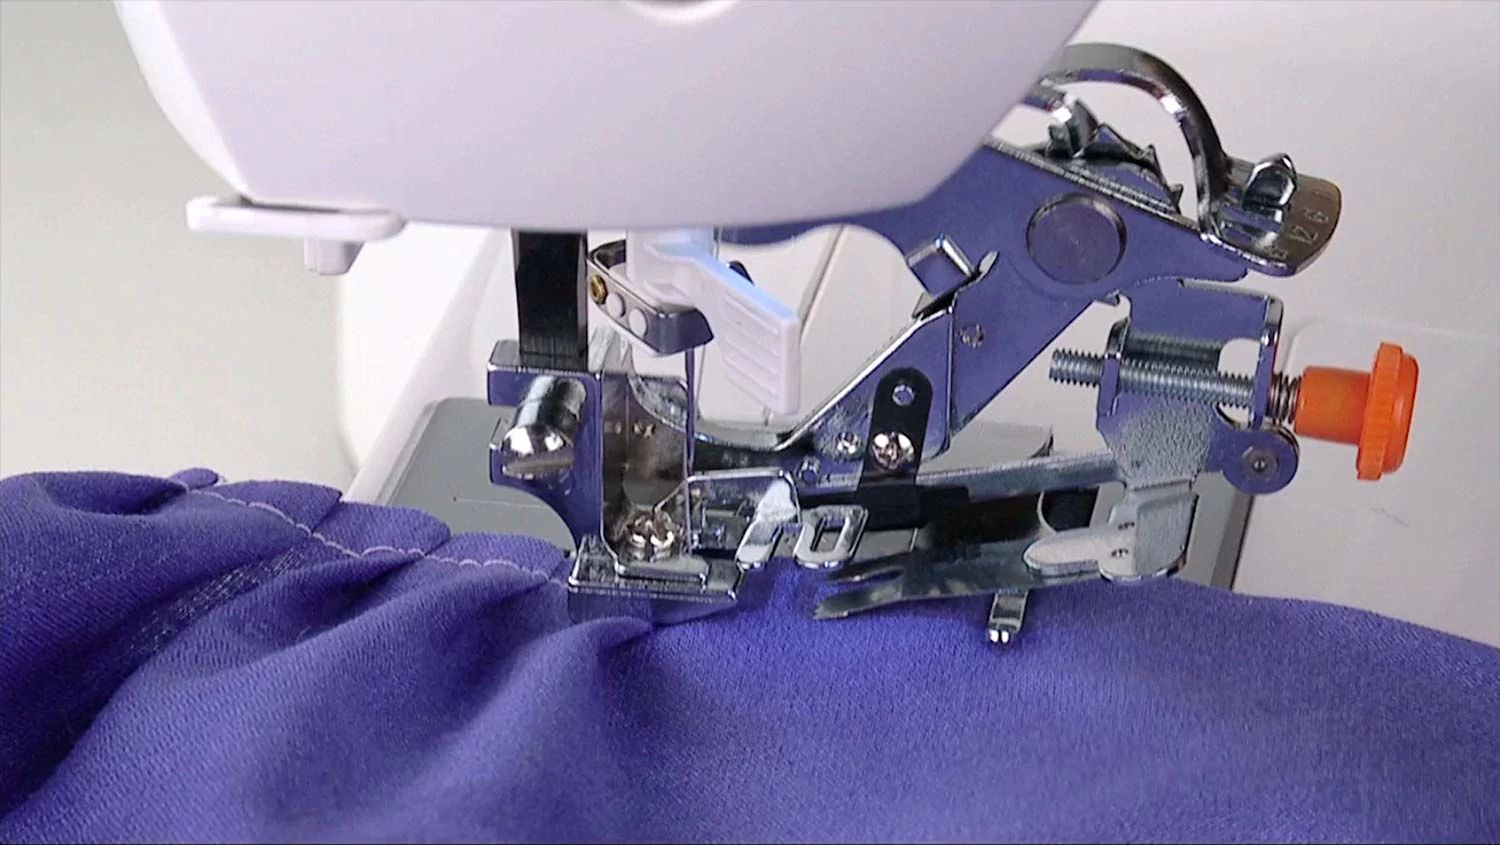 SINGER Ruffler Foot for SE91 Series Sewing and Embroidery Machines